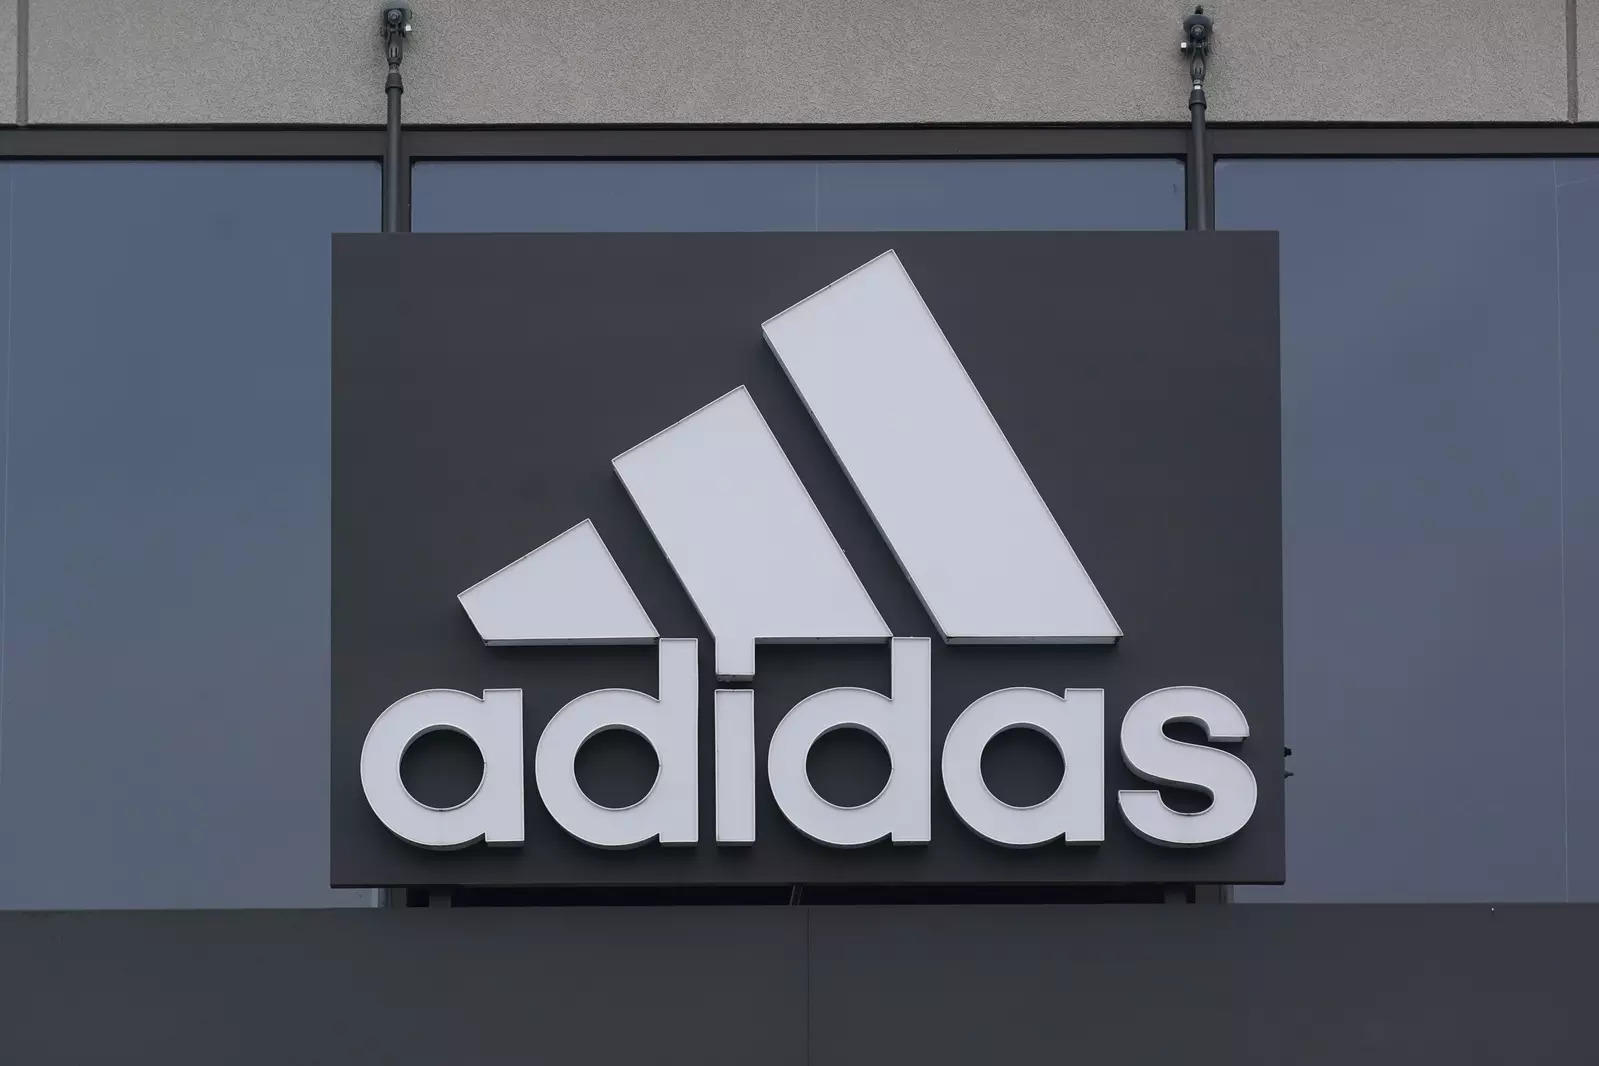 Adidas appoints boss of rival as CEO after Ye fallout, Retail News, Retail